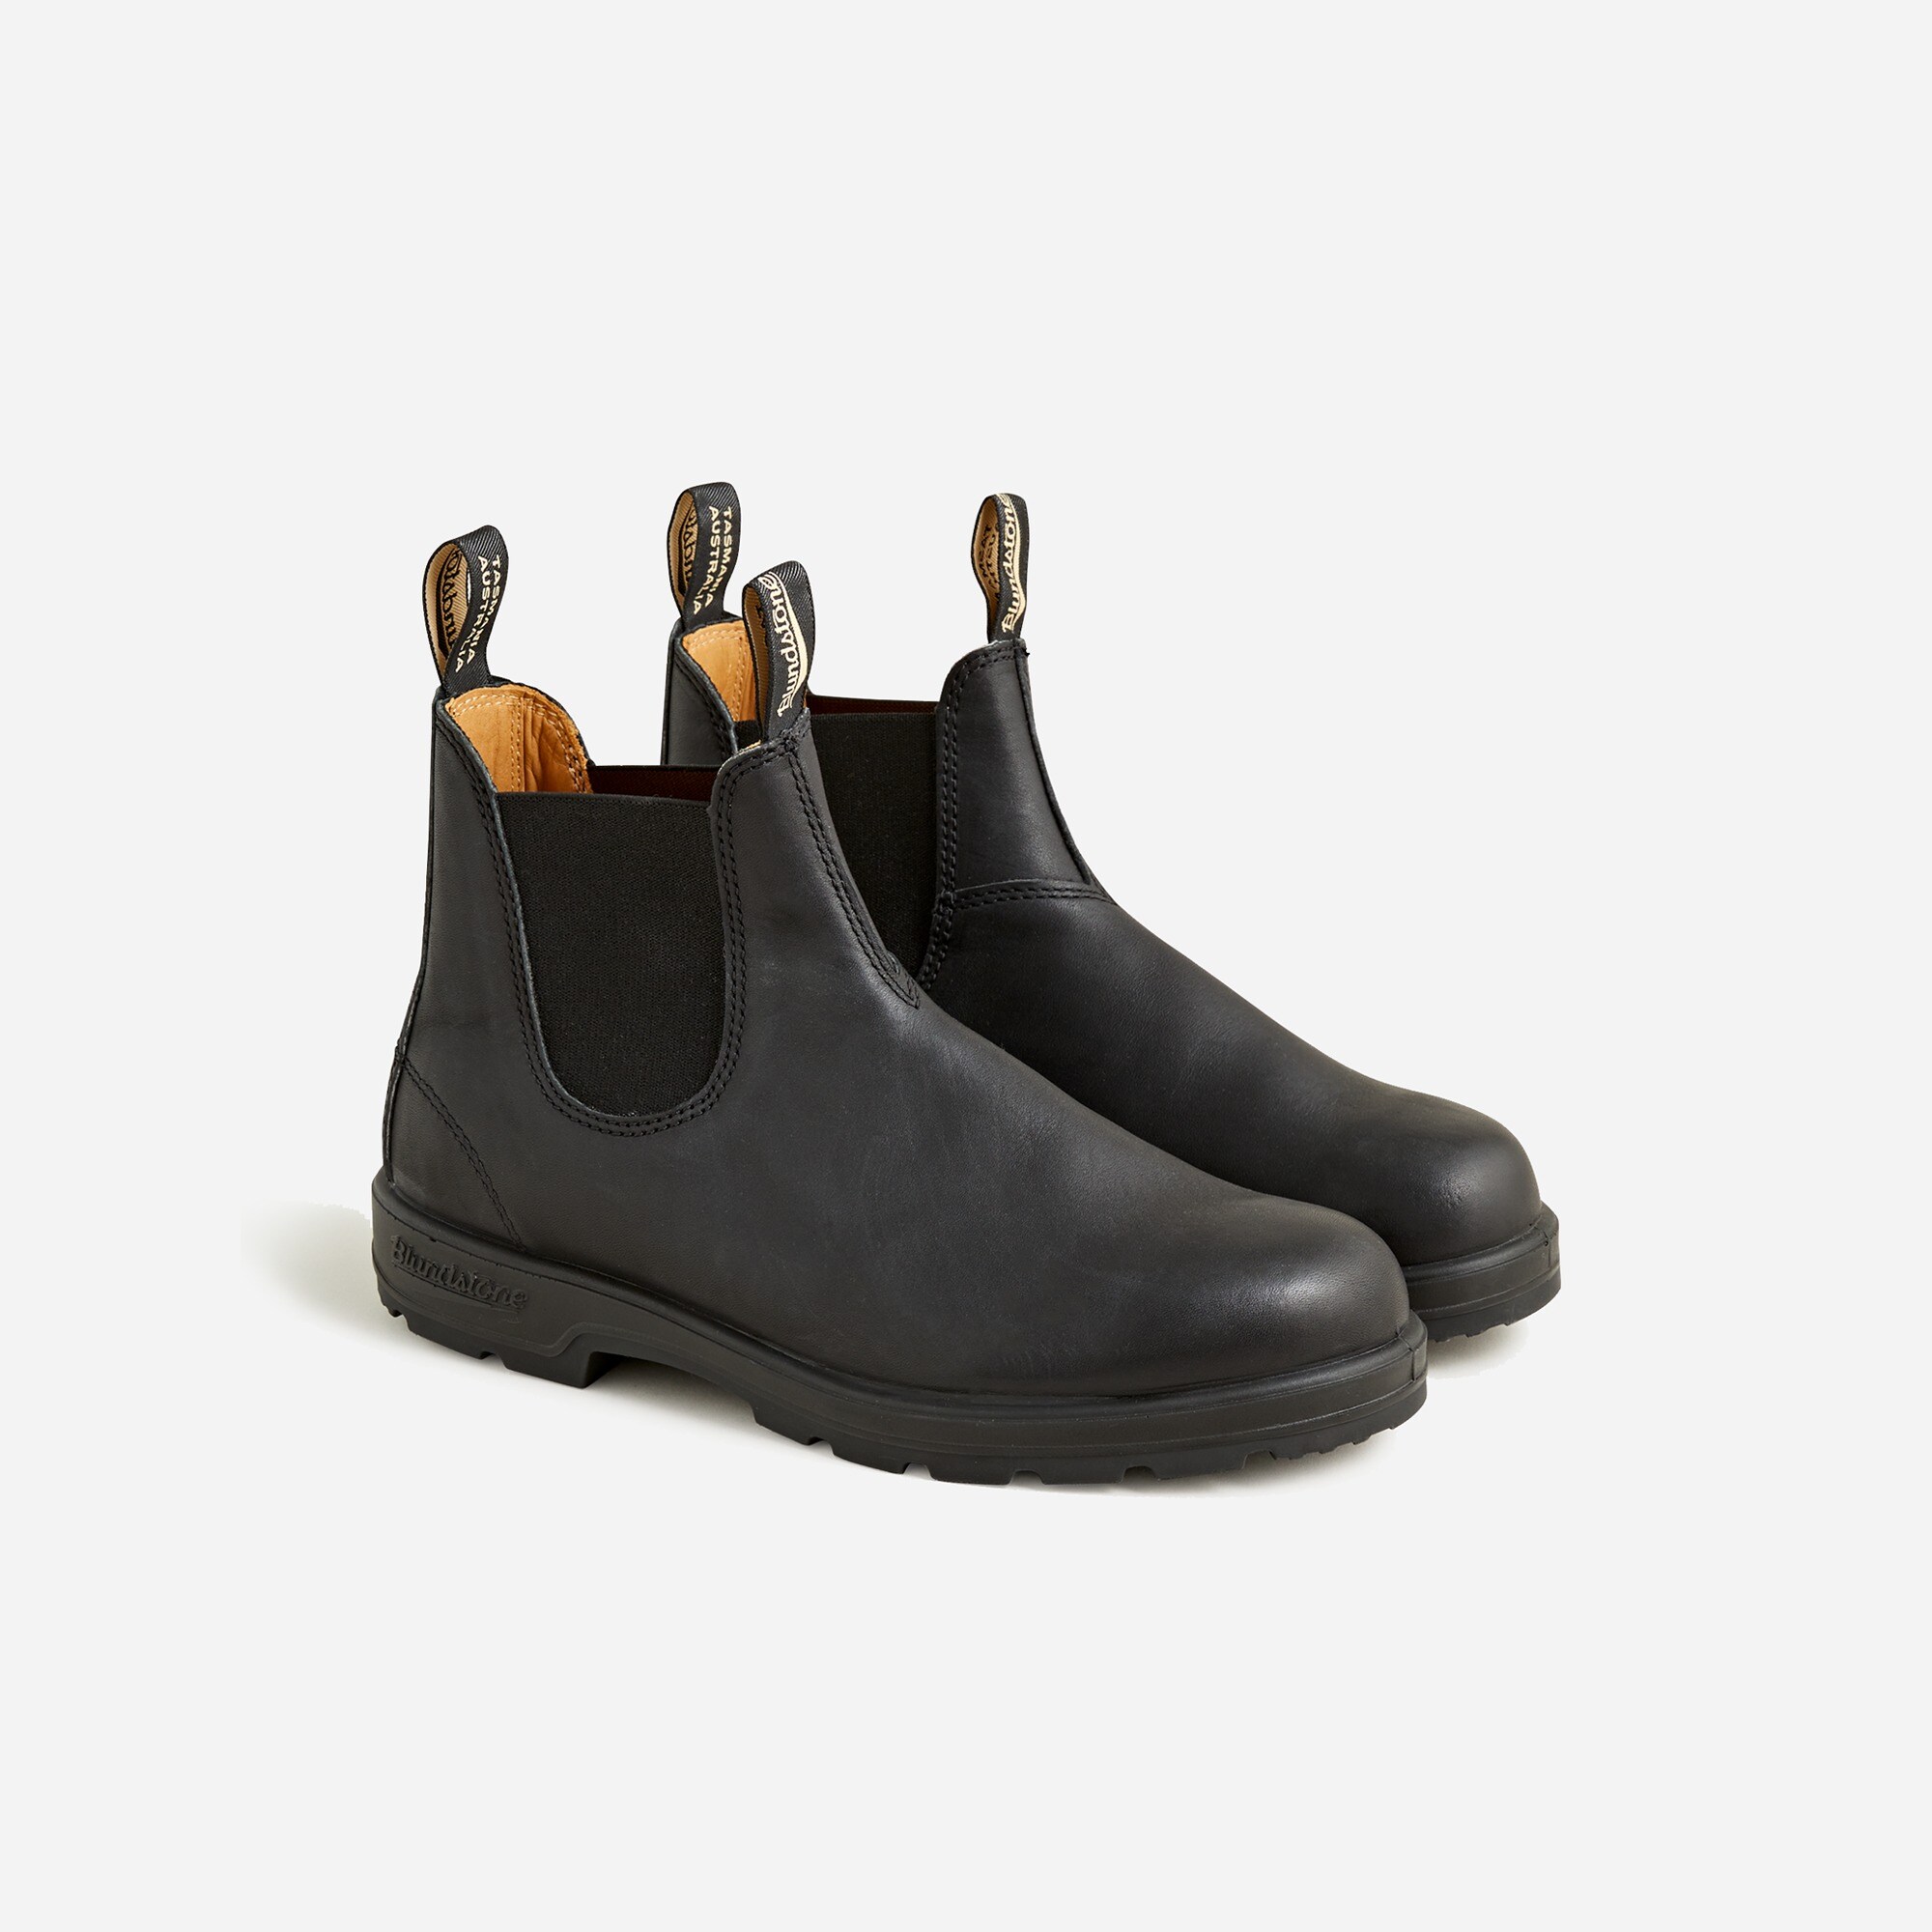  Blundstone® 558 Chelsea boots